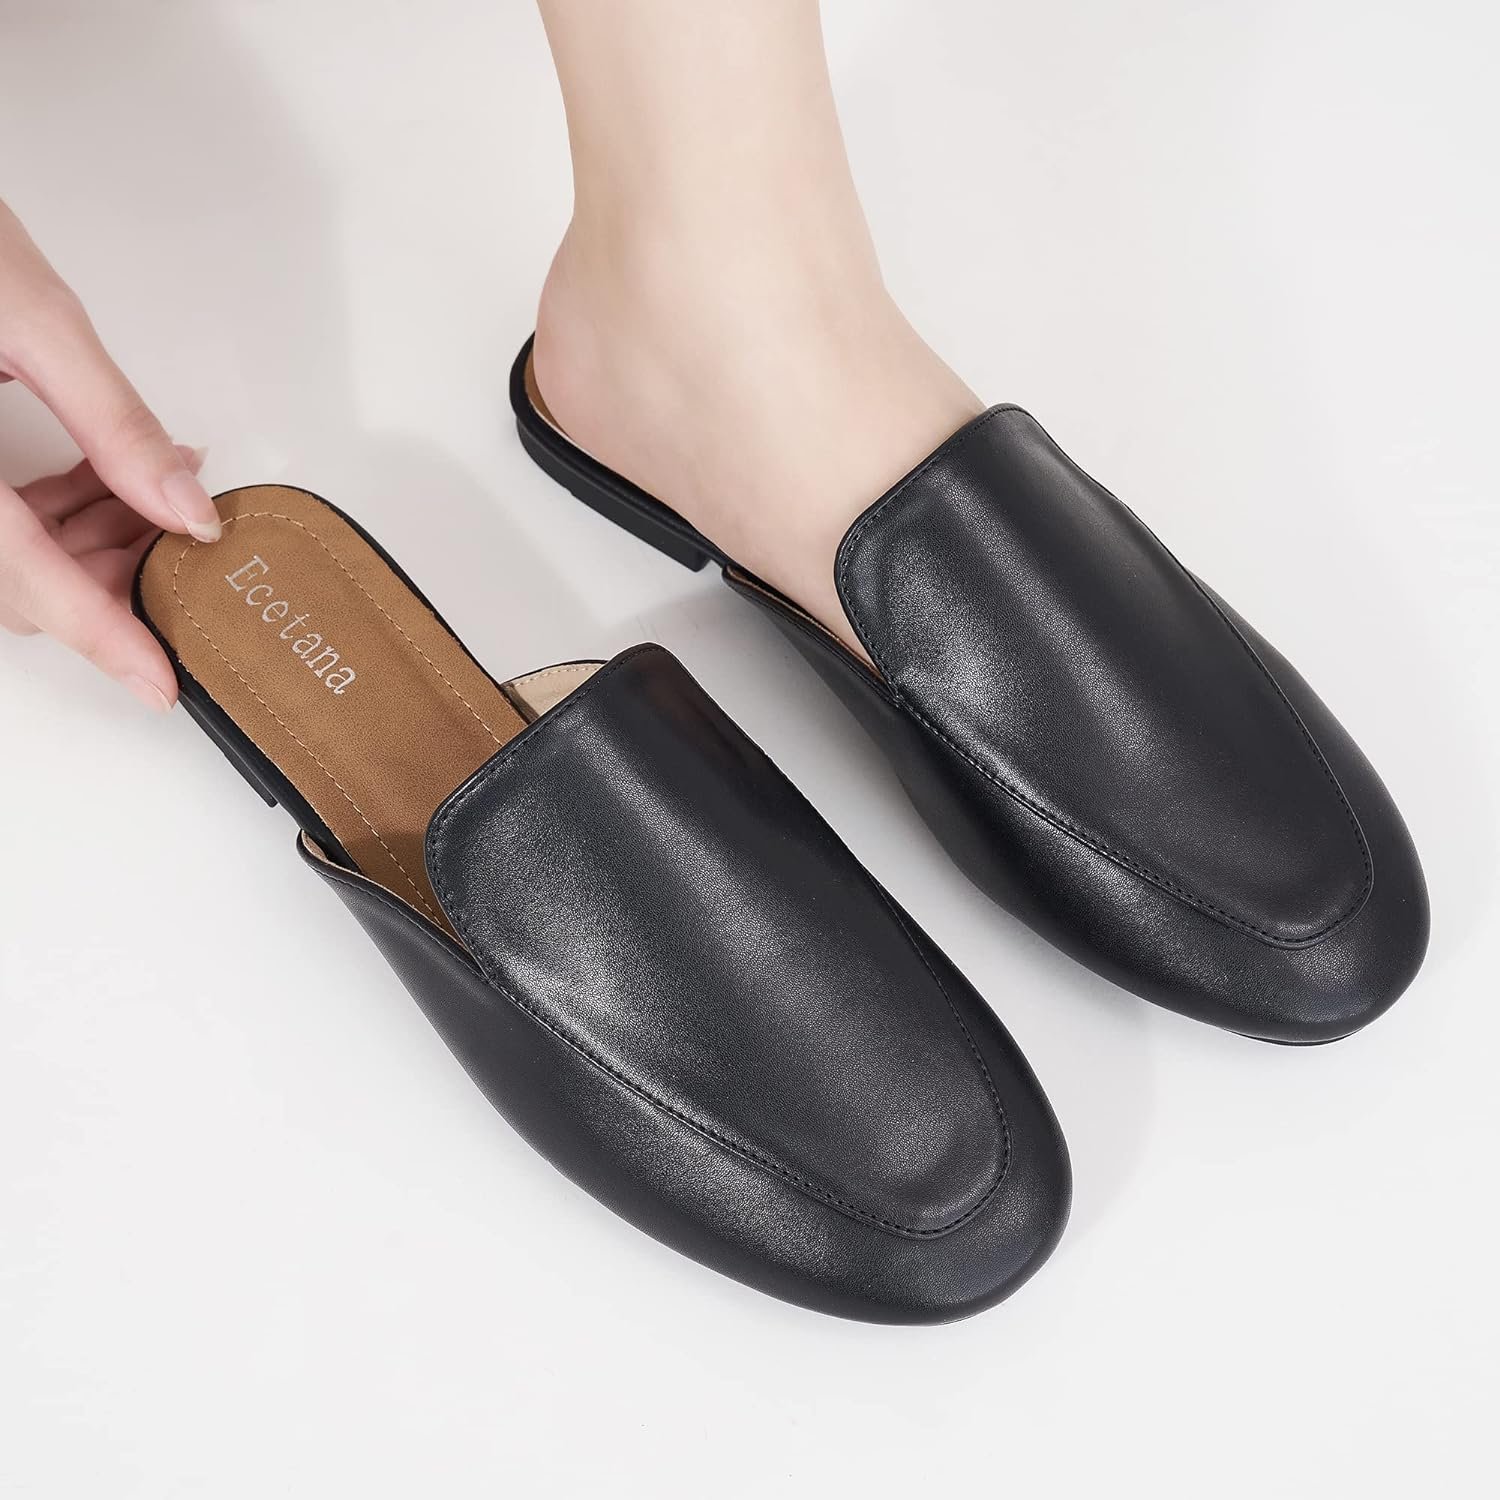 Ecetana Mules for Women Flats Shoes: Closed Round Toe Slip On Flat Mules - Comfortable Slides Backless Loafers